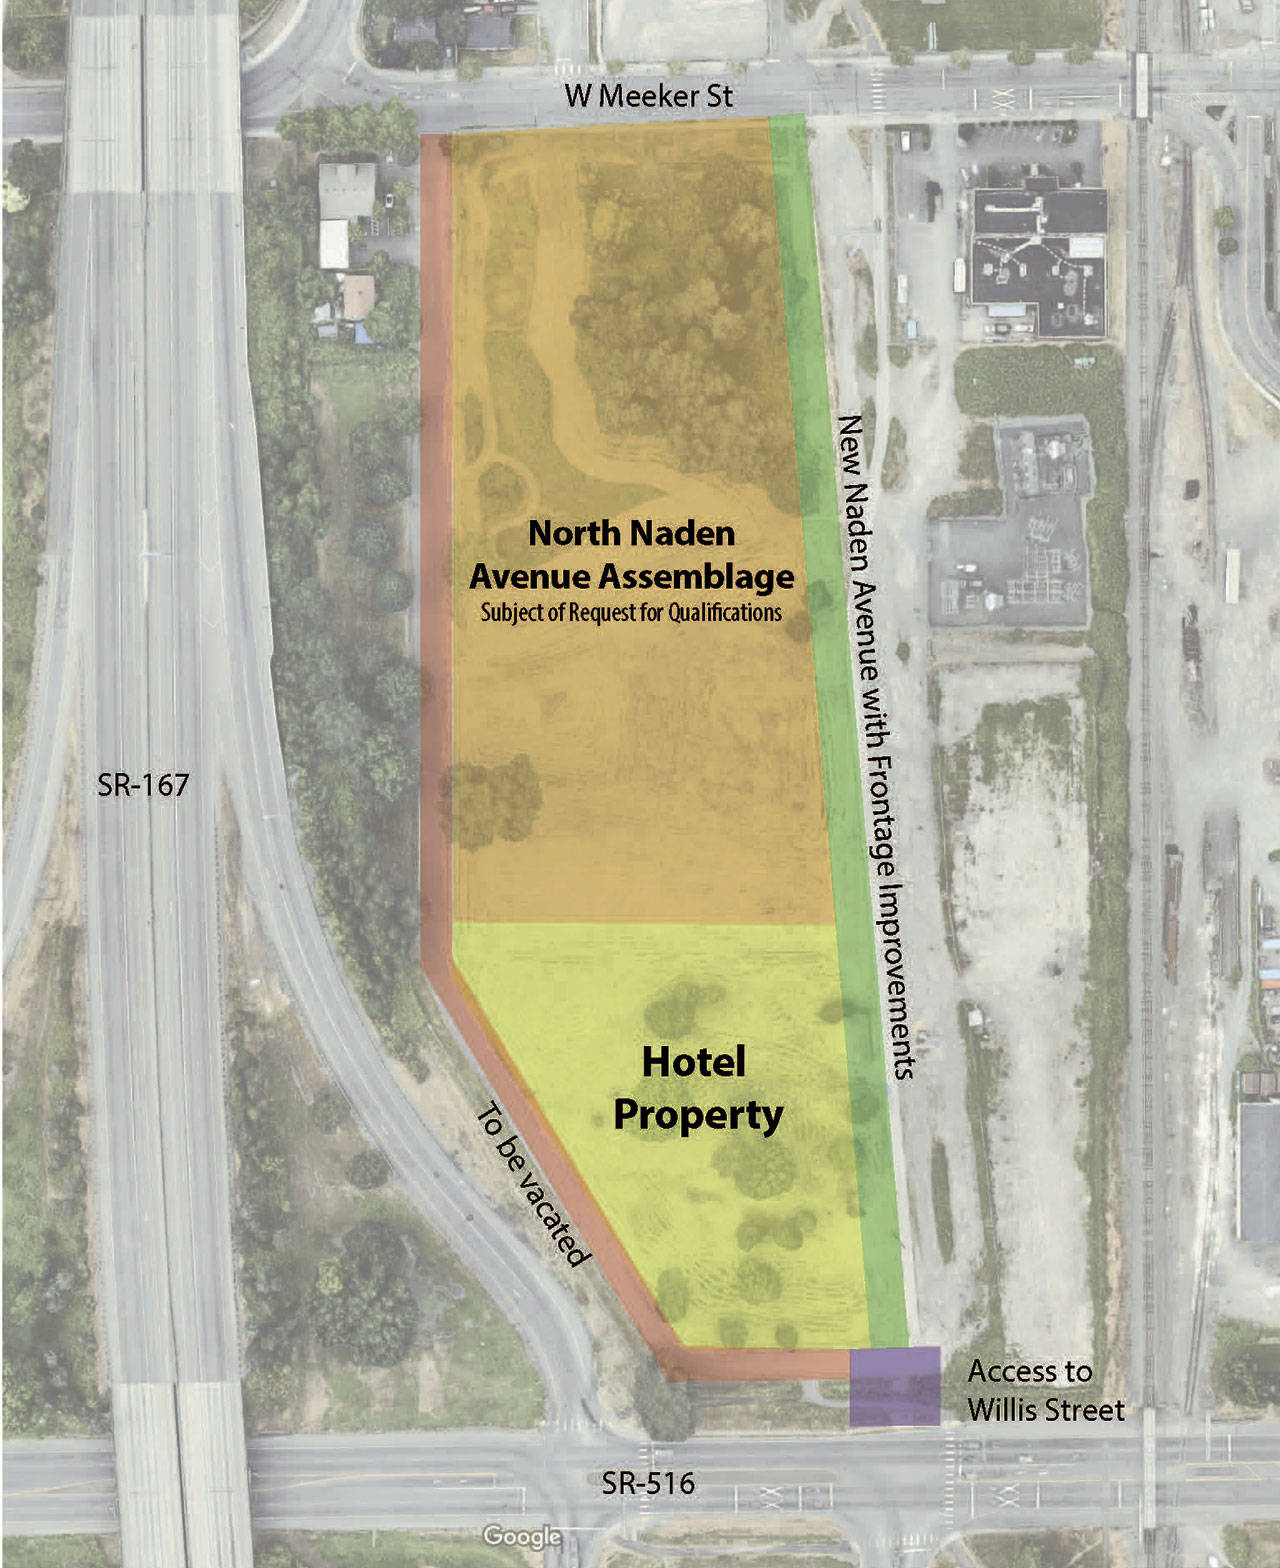 City of Kent leaders hope to find a developer to help bring light manufacturing to the northern portion of the city-owned Naden property. A hotel is proposed for the southern end. COURTESY GRAPHIC, City of Kent